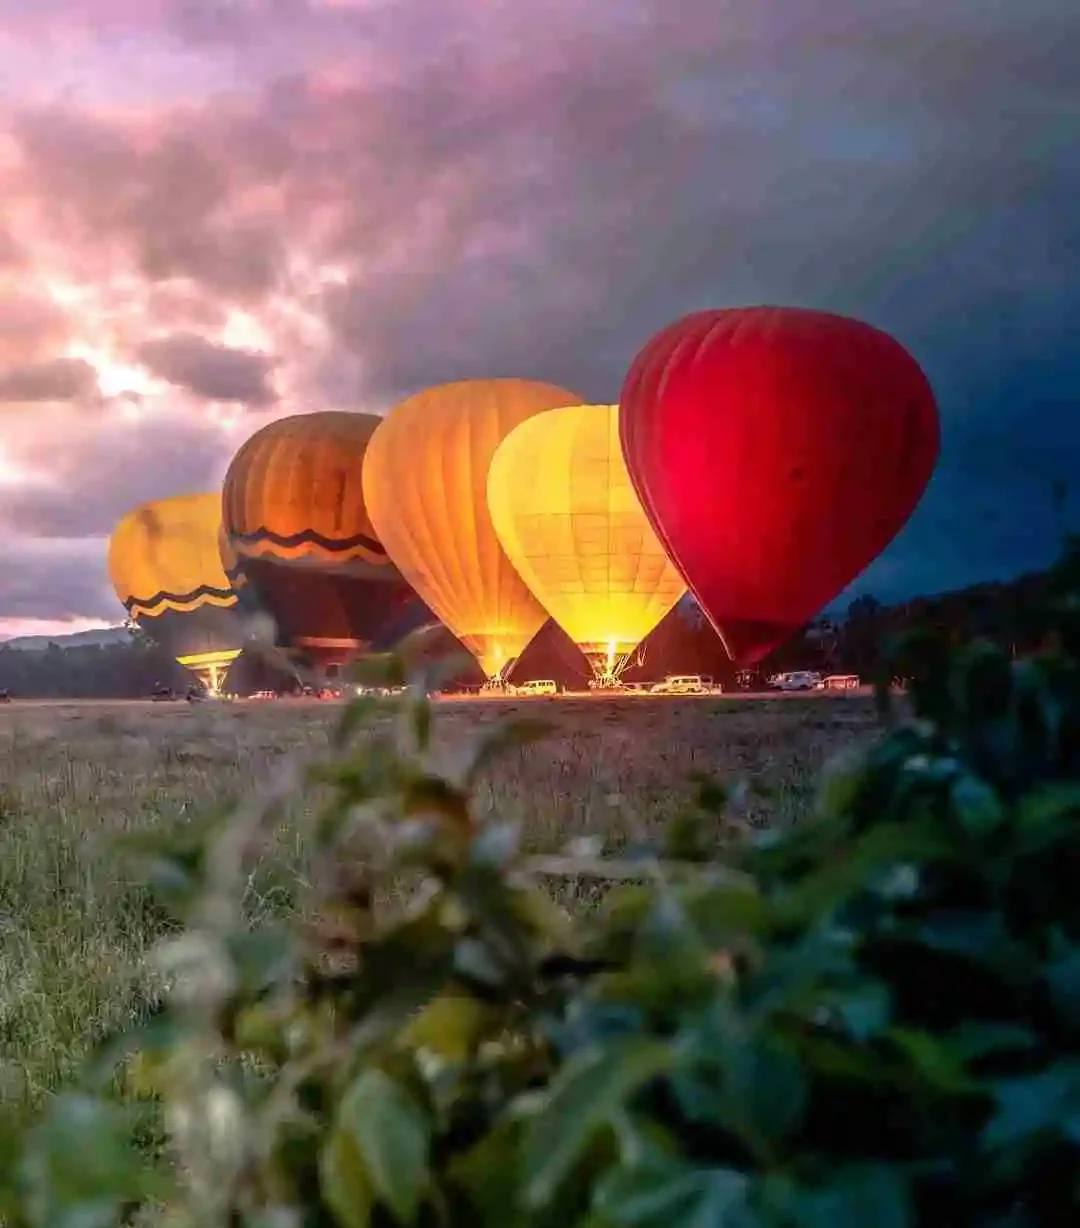 5 large hot air balloons sit glowing on a darkened landscape ready to lift off the ground